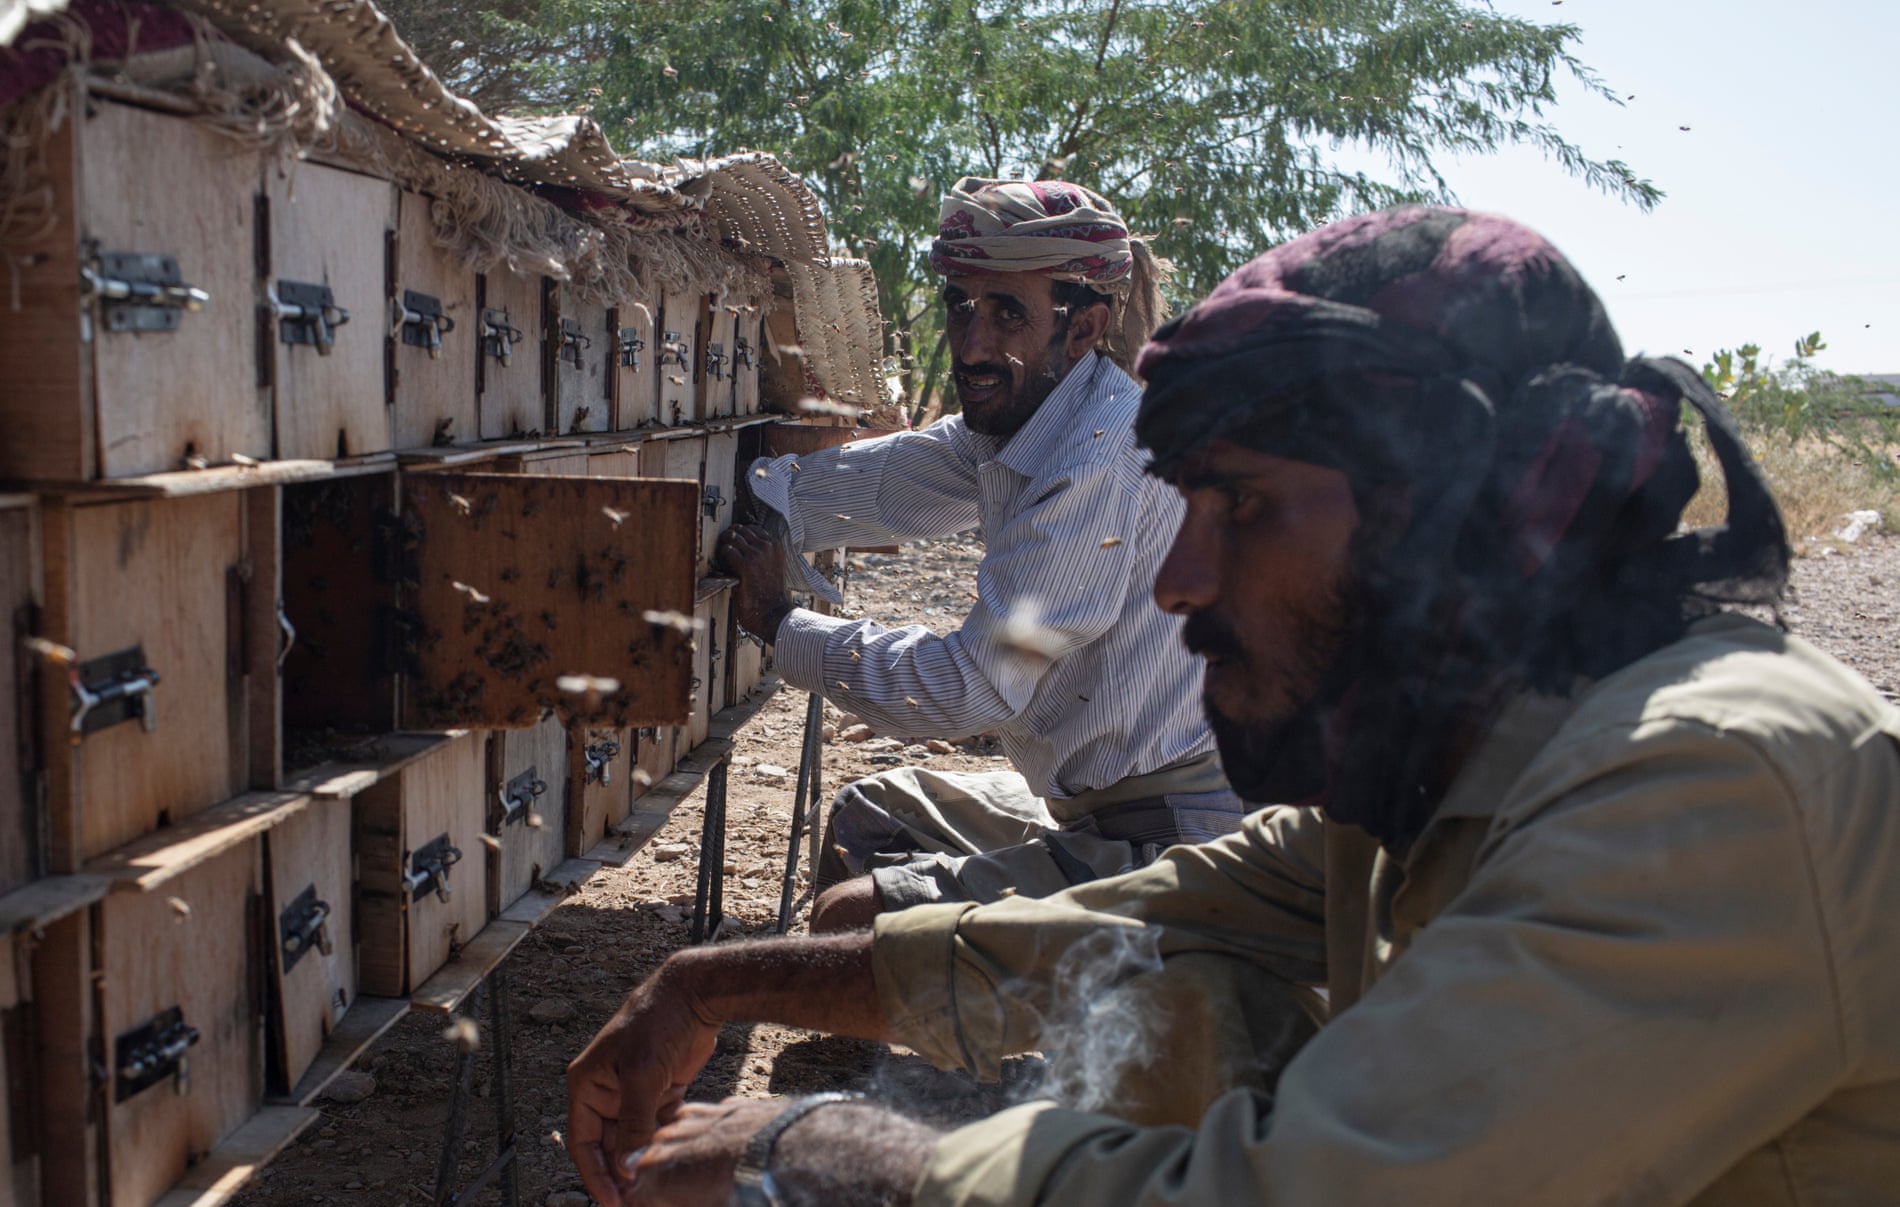 Beekeepers collect honey comb from hives just outside Ataq, Shabwah governorate, Yemen.